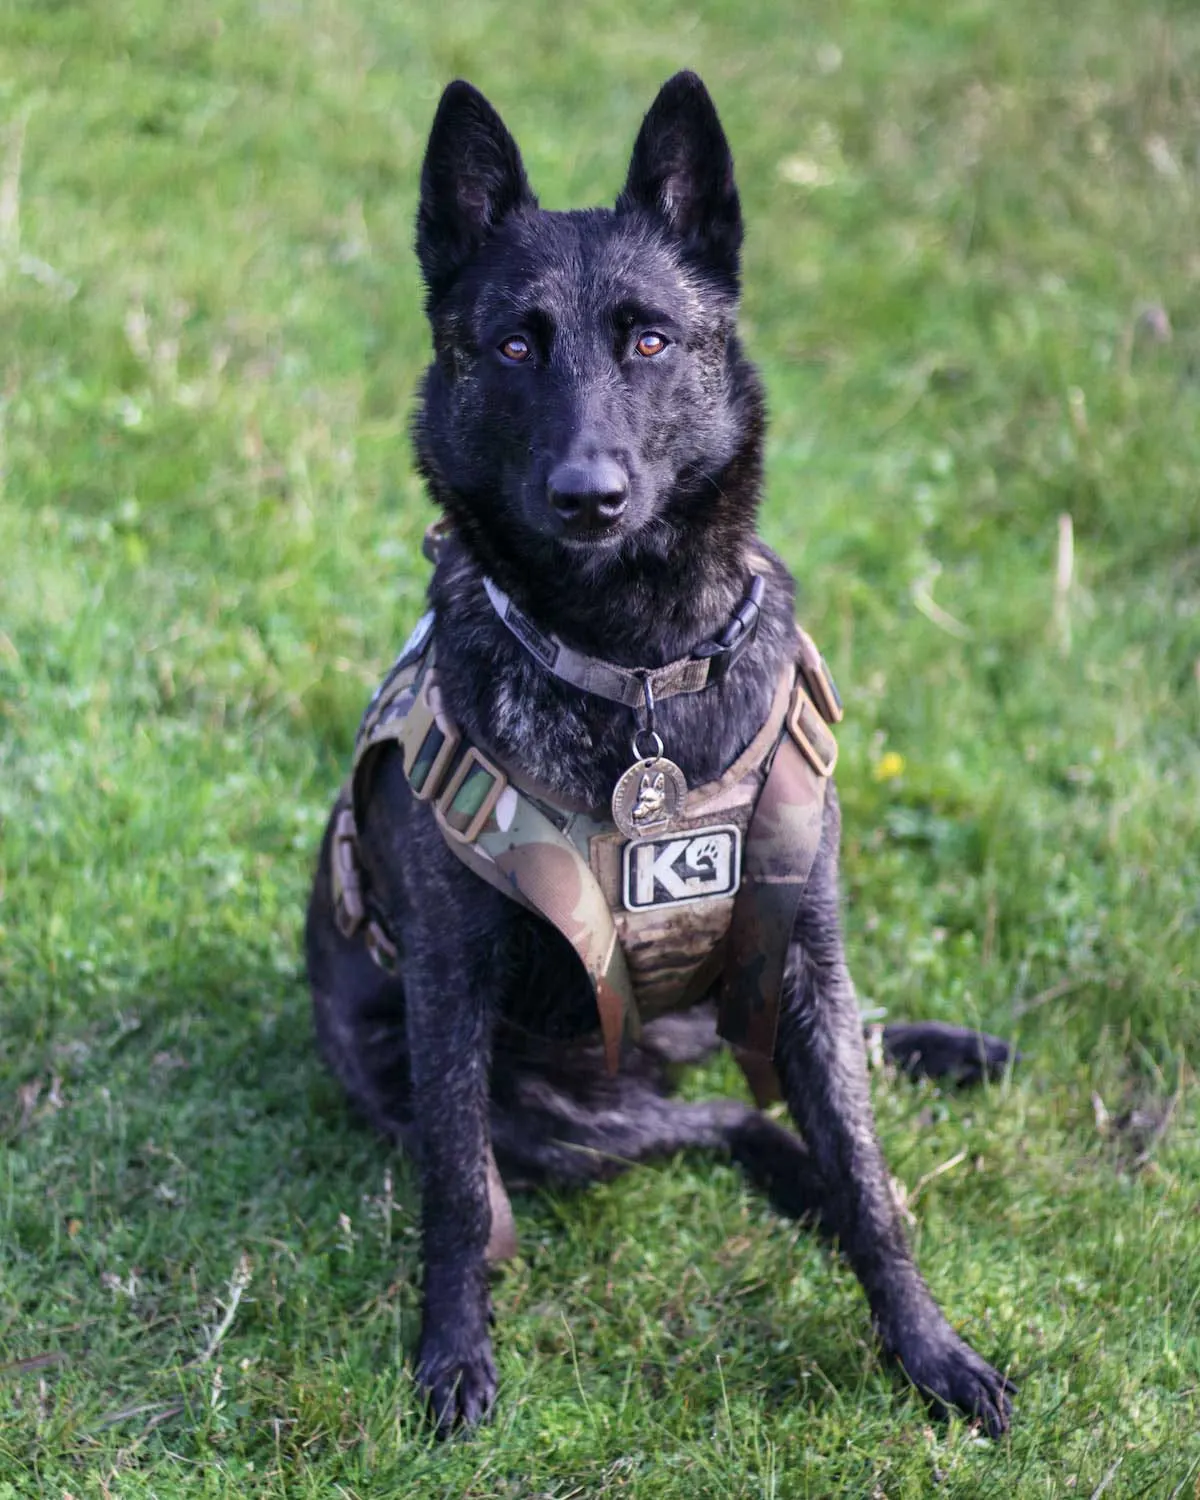 Police K9 with harness and metal on collar sitting on grass.